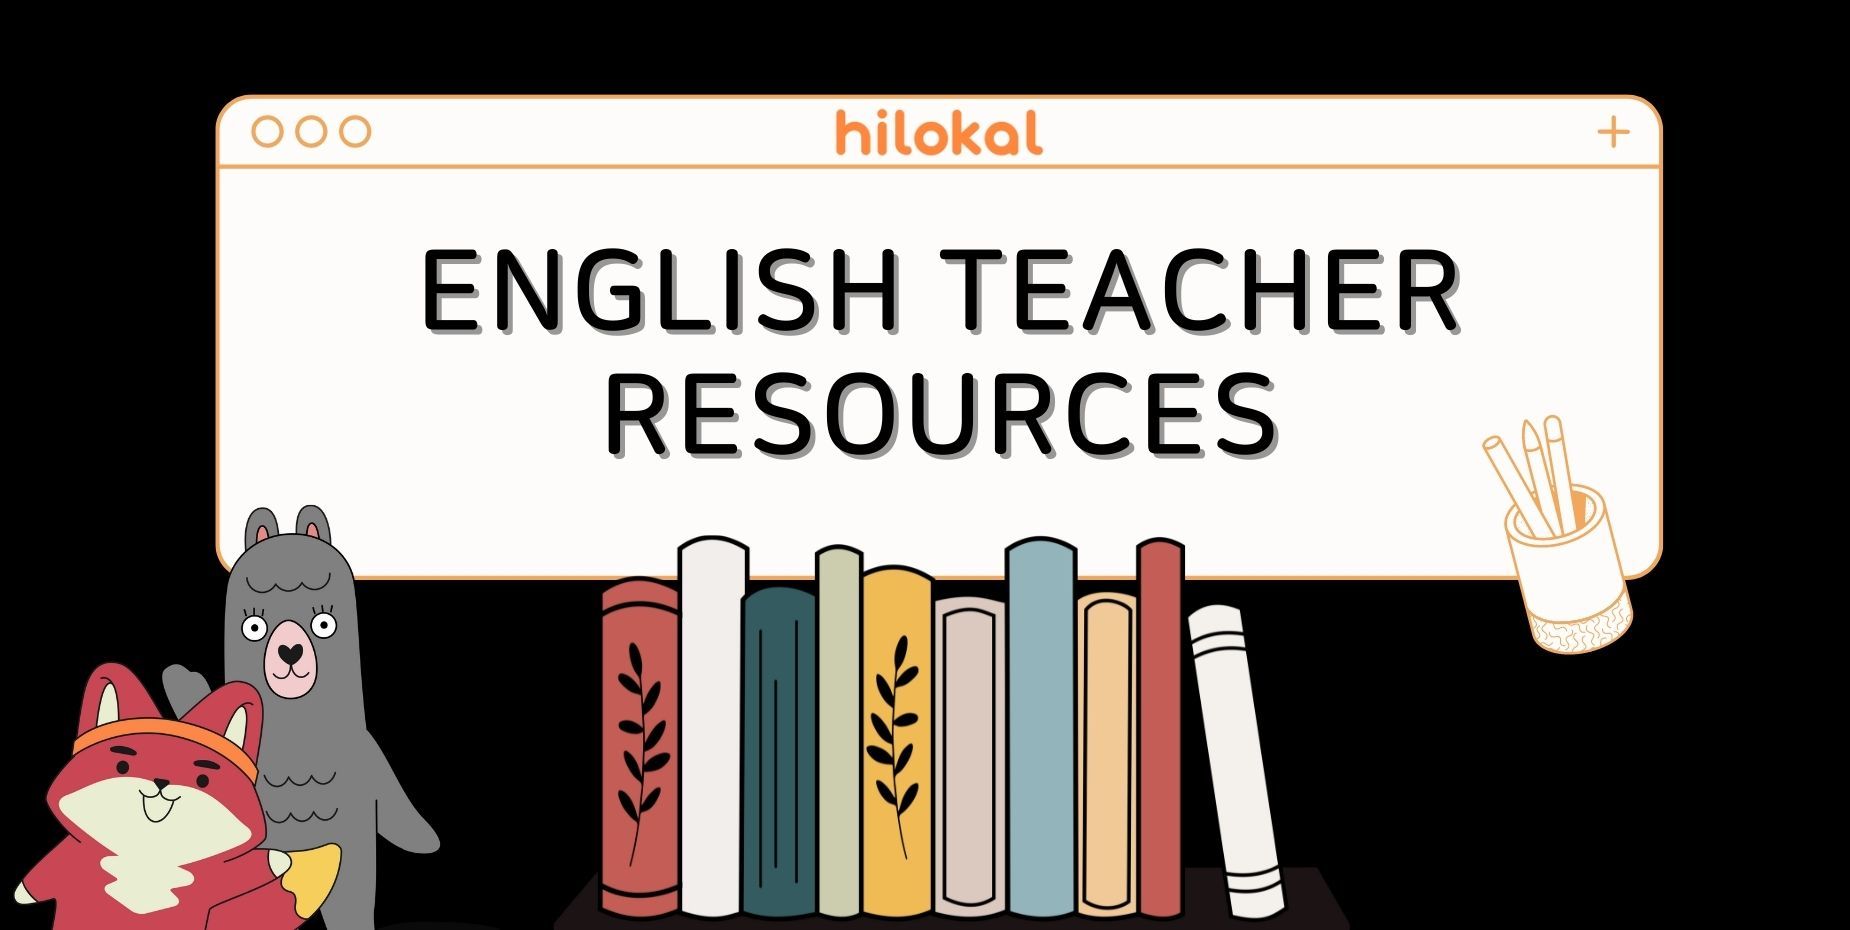 English Teacher Resources: Finding Resources and Teaching Aids